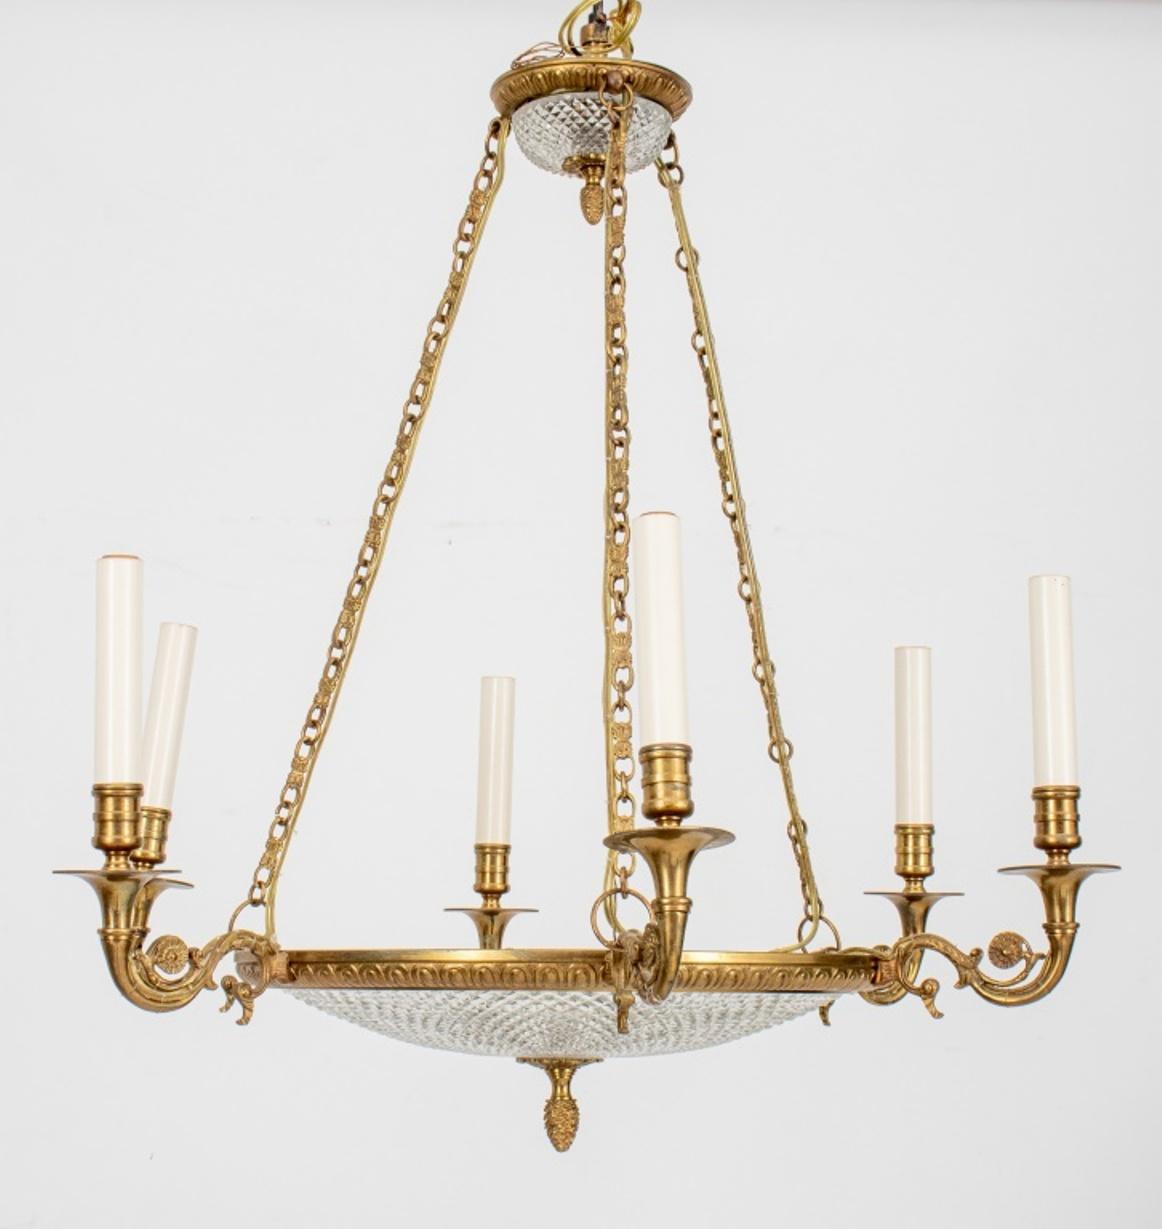 20th Century Empire Style Glass Gilt Metal 6 Light Chandelier For Sale